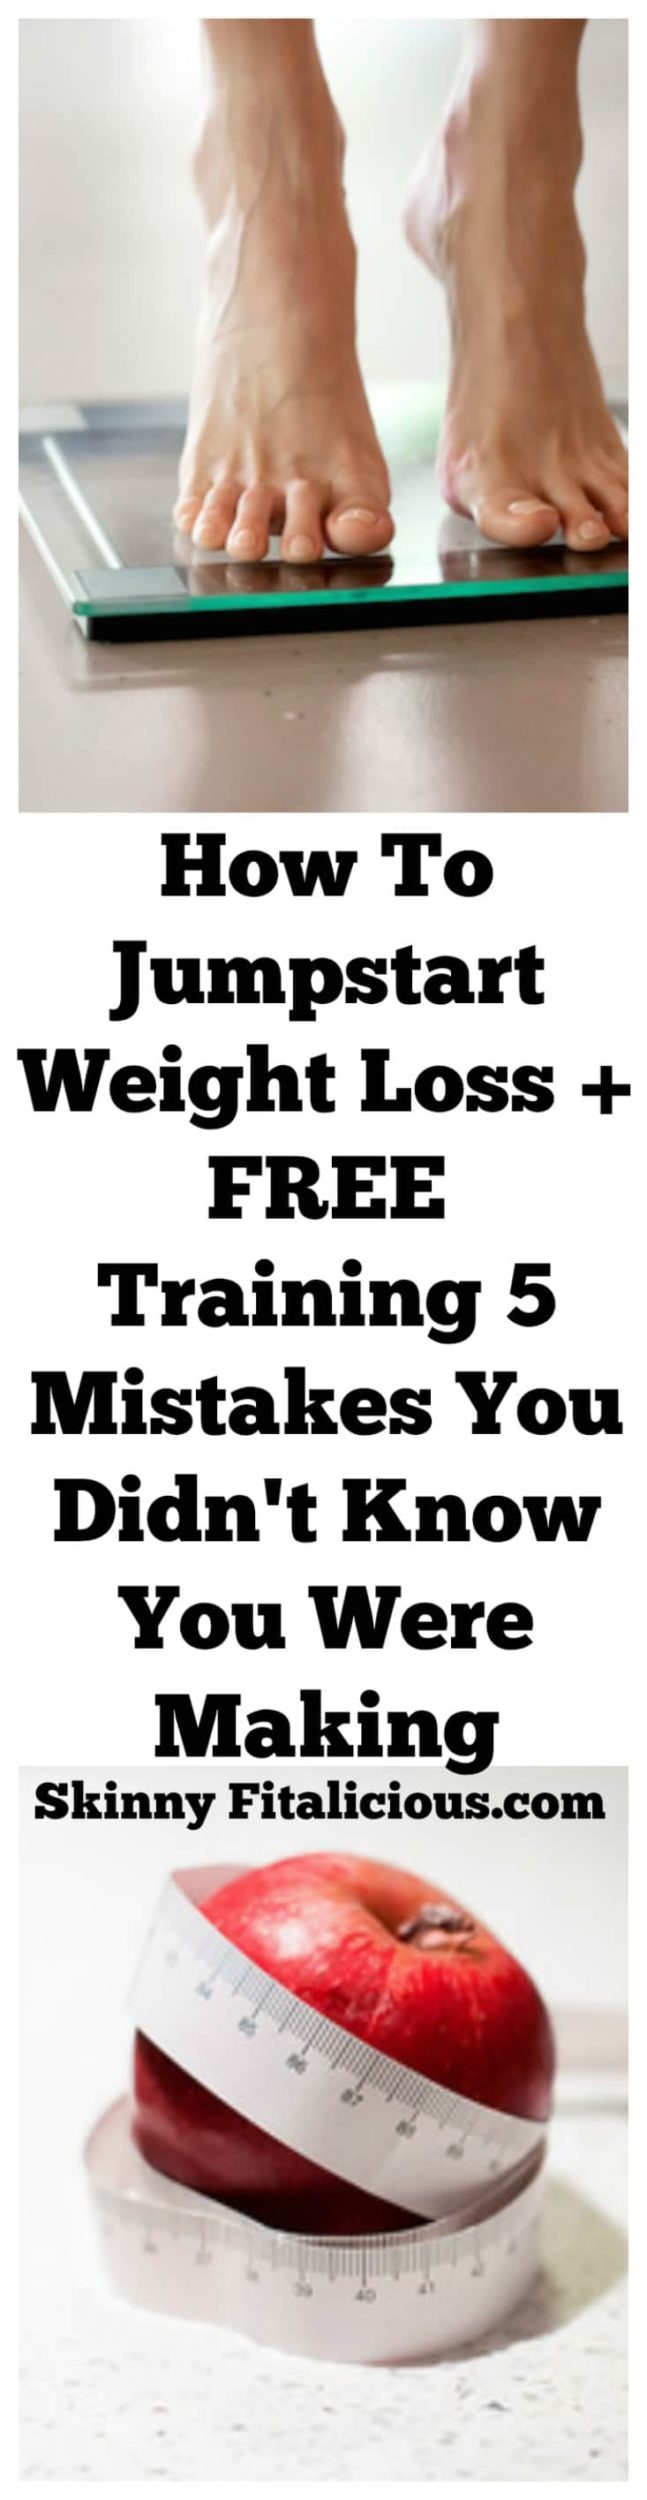 Are you trying to lose weight? Here's how to Jump Start Weight Loss plus a FREE training on 5 weight loss mistakes you didn't know you were making!